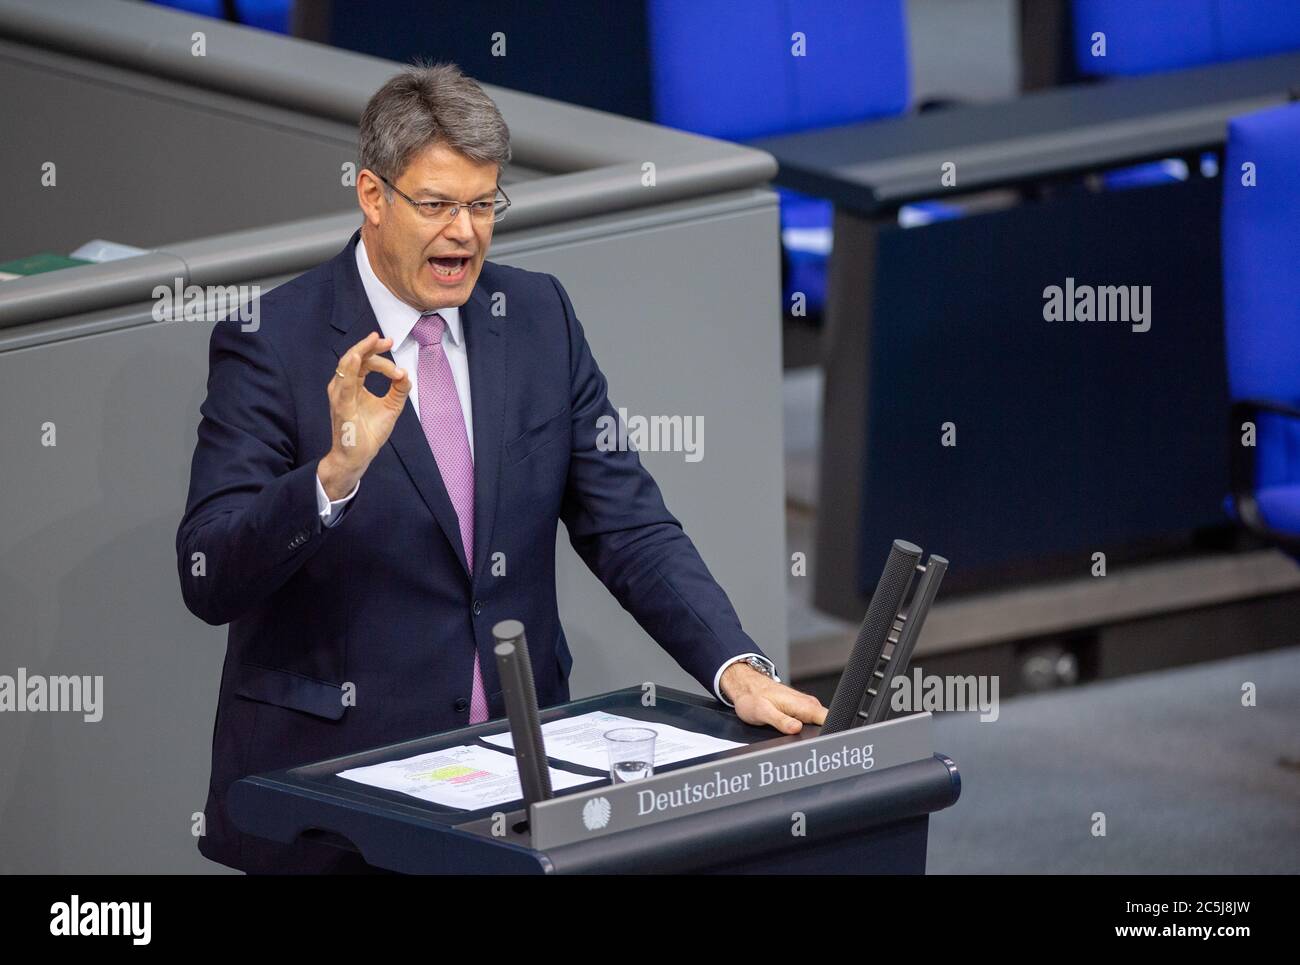 Berlin, Germany. 03rd July, 2020. Patrick Schnieder (CDU) speaks in the plenary session of the German Bundestag. The main topics of the 171st session of the 19th legislative period are the adoption of the Coal Exit Act, a topical hour on the excesses of violence in Stuttgart, as well as debates on electoral law reform, the protection of electronic patient data, the welfare of farm animals and the German chairmanship of the UN Security Council. Credit: Christophe Gateau/dpa/Alamy Live News Stock Photo